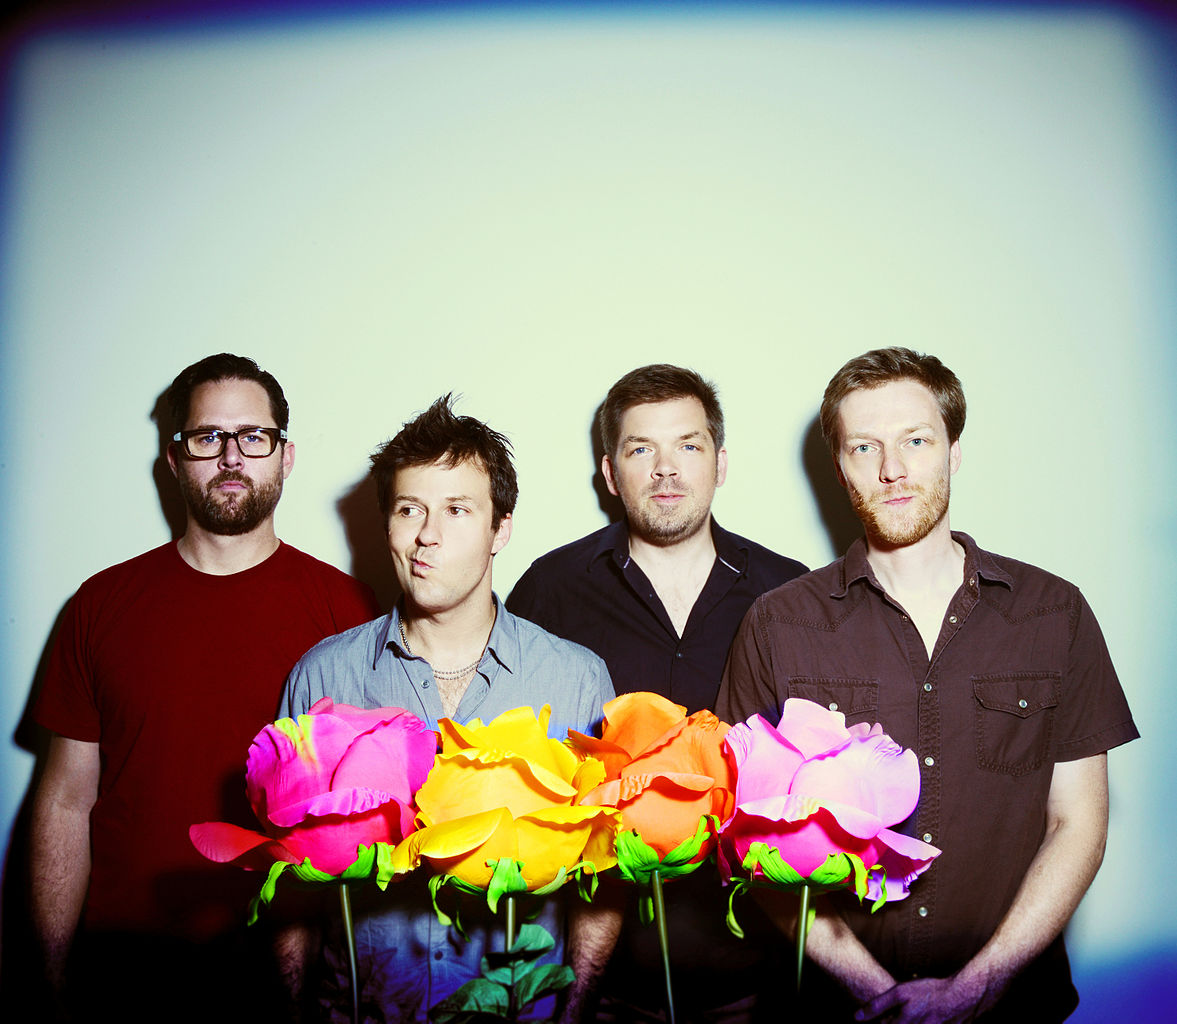 The Dismemberment Plan: “Finding the poetry in what’s real”